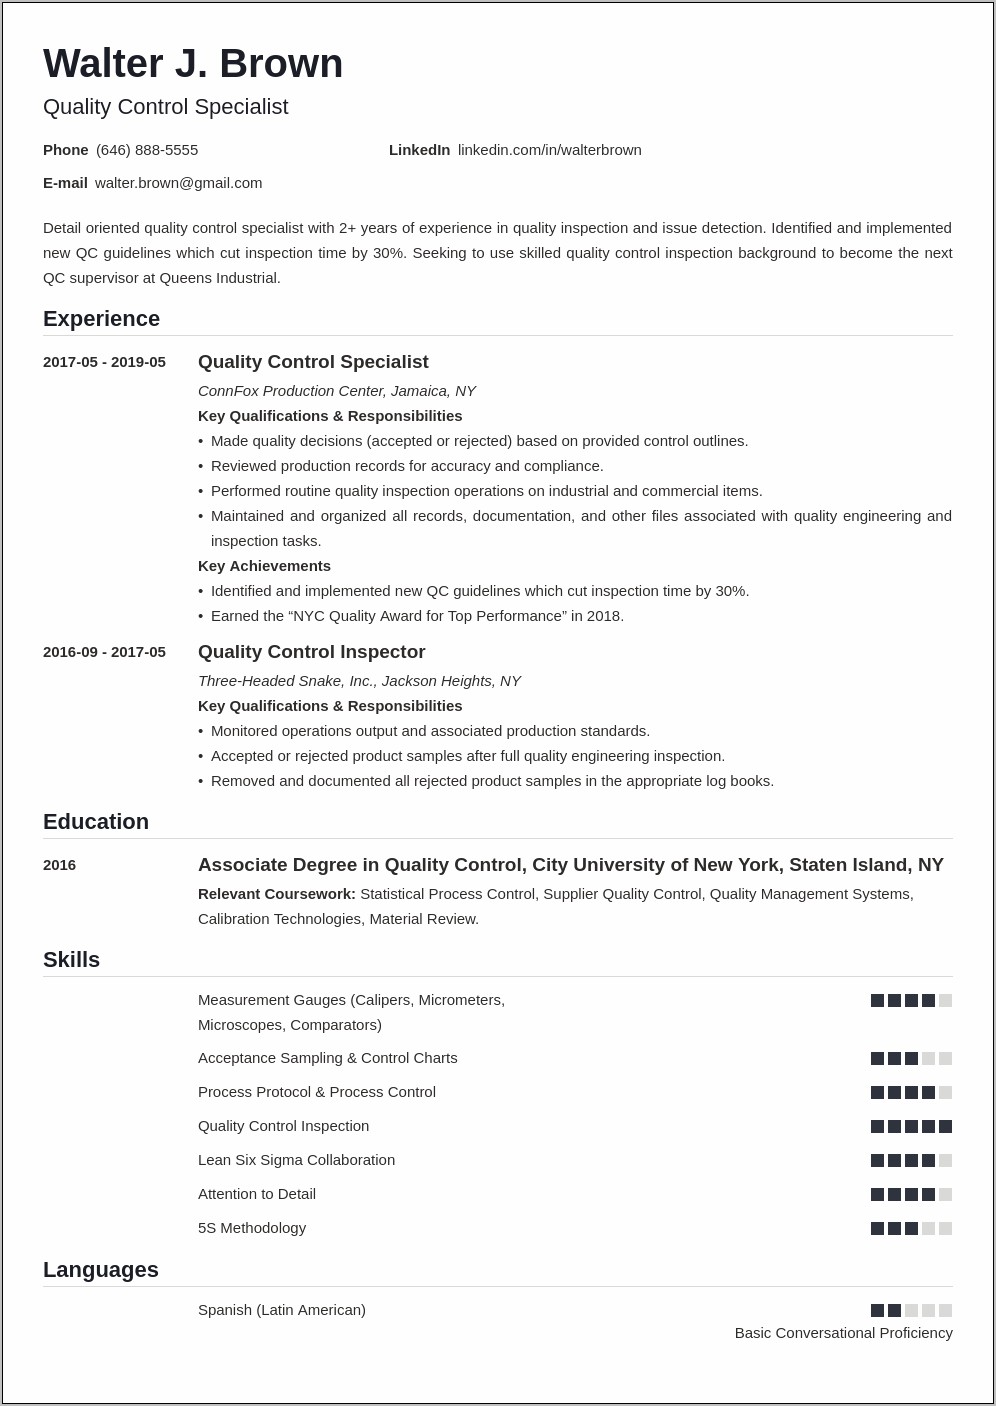 Resume Objective Statement For Quality Assurance